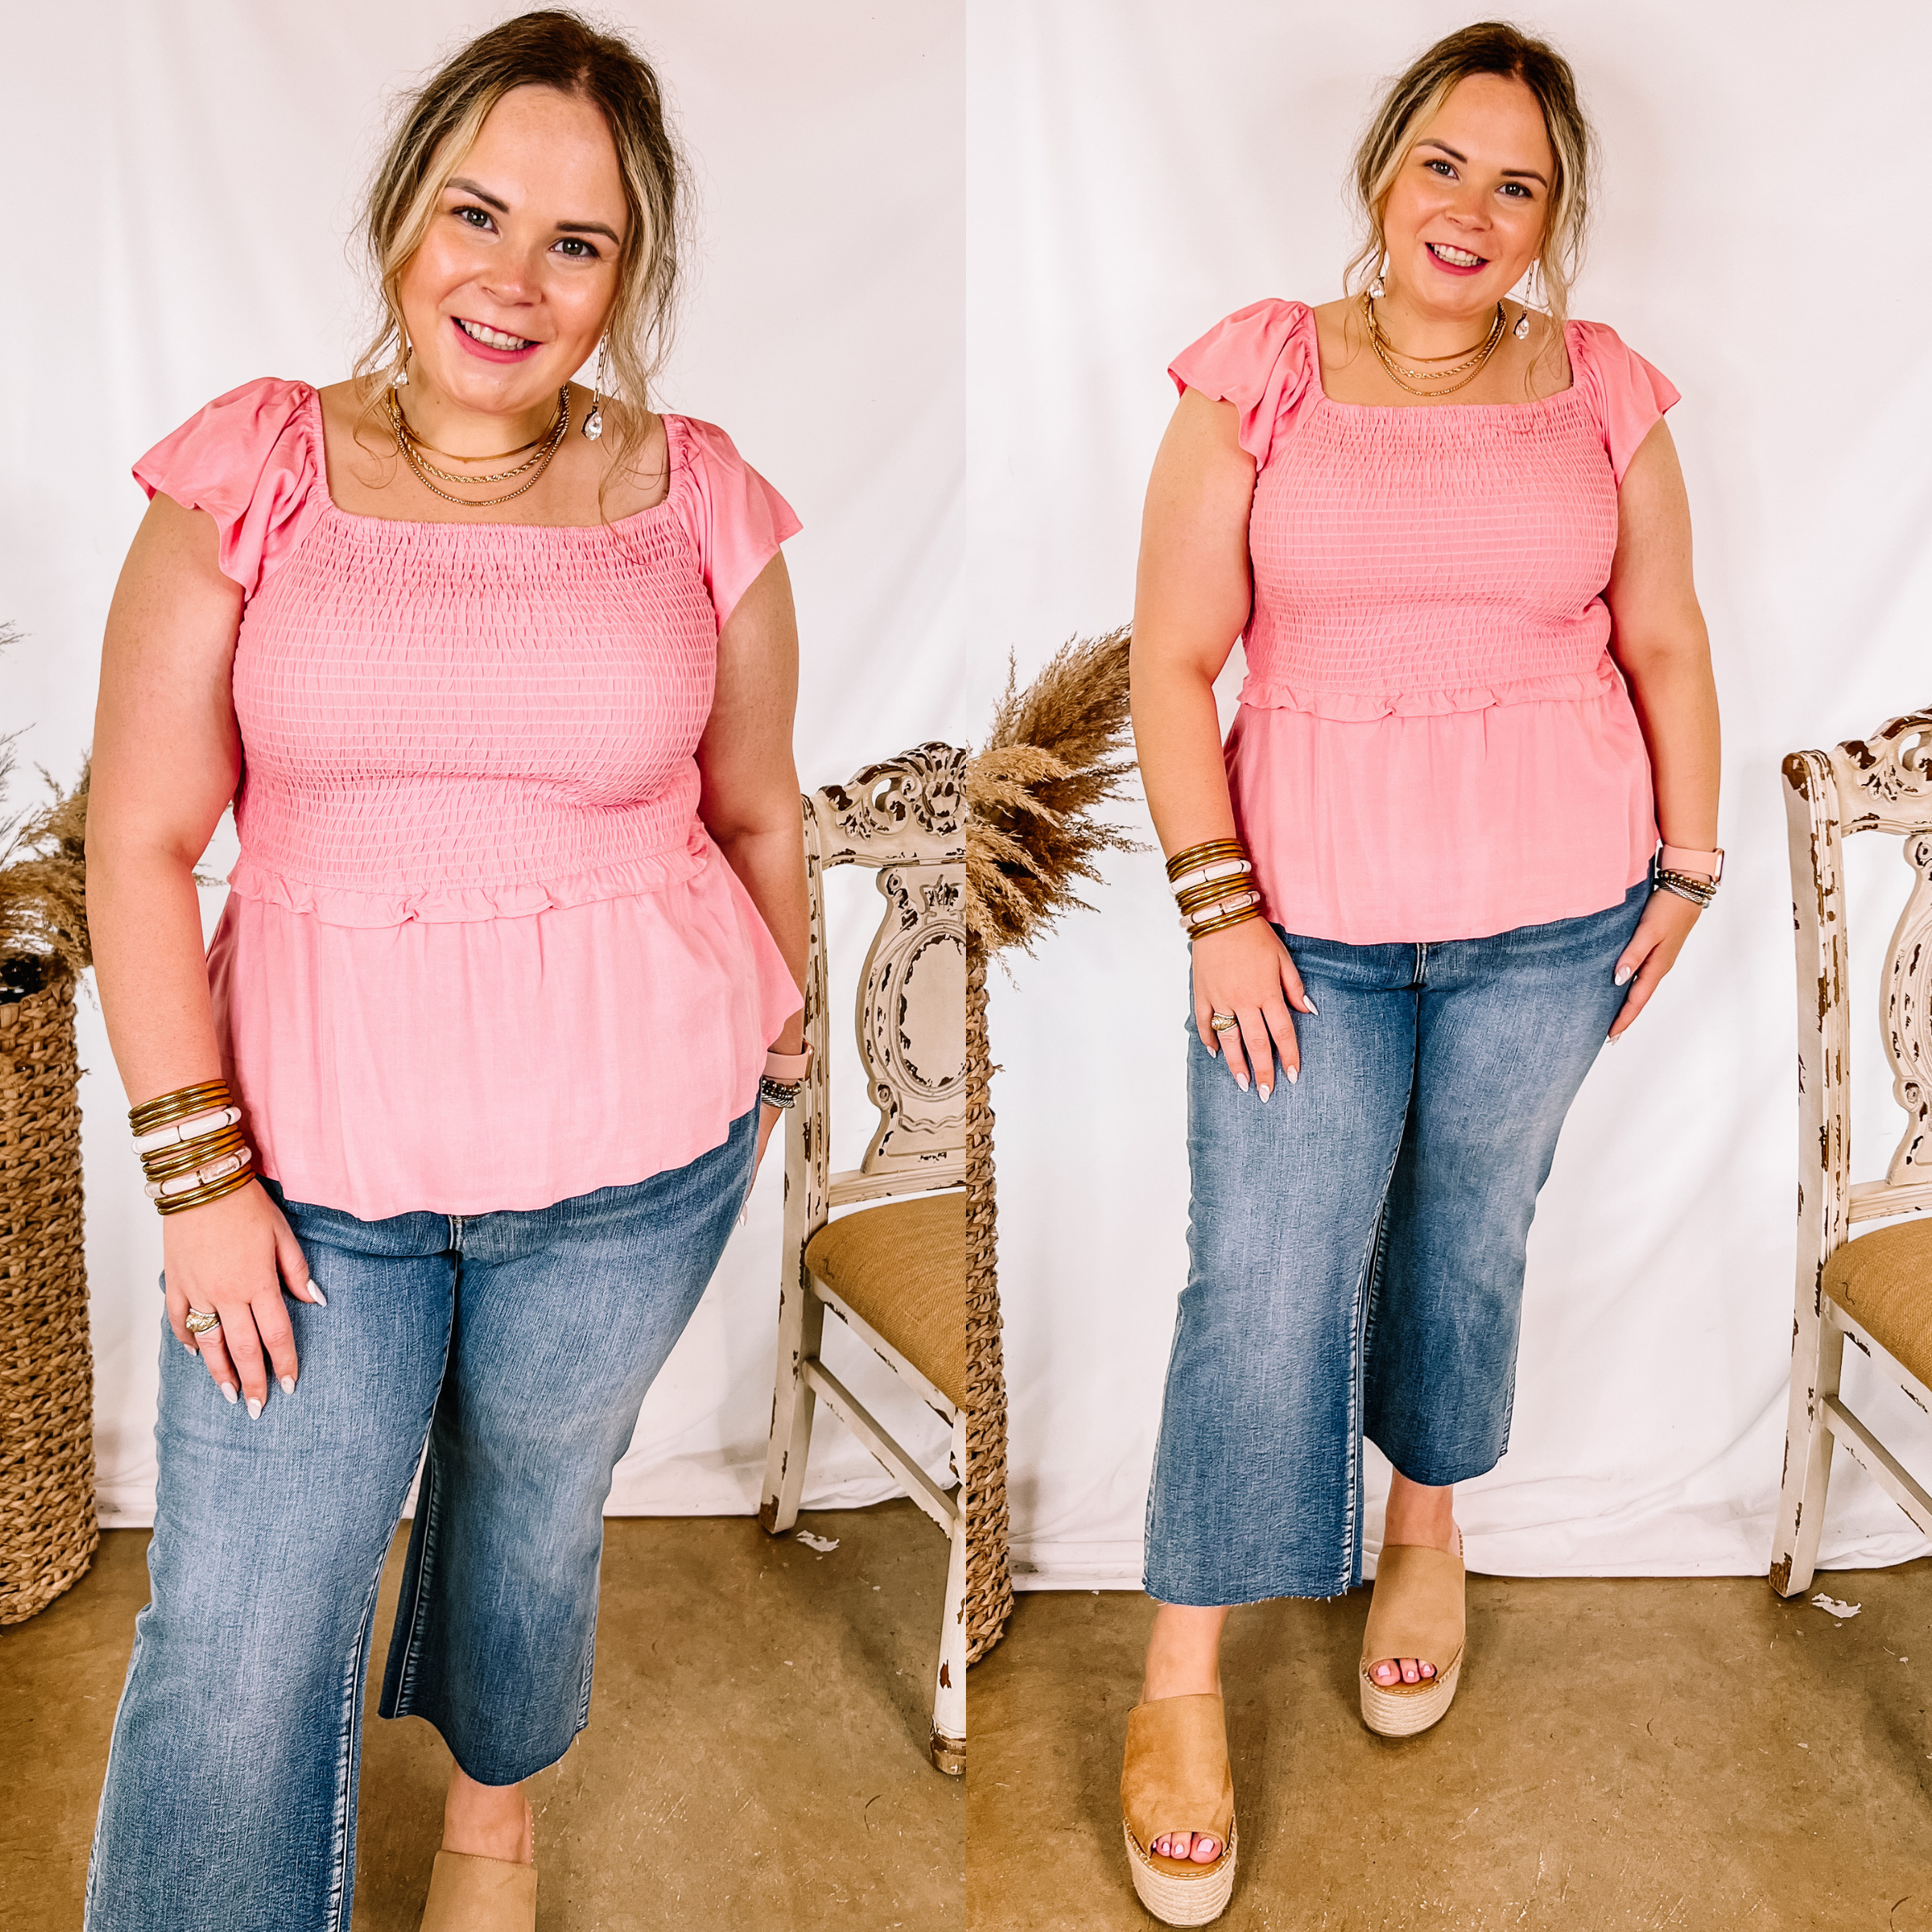 Model is wearing a coral pink top with a smocked bodice and a peplum hem. Model has it paired with tan wedges, cropped jeans, and gold jewelry.